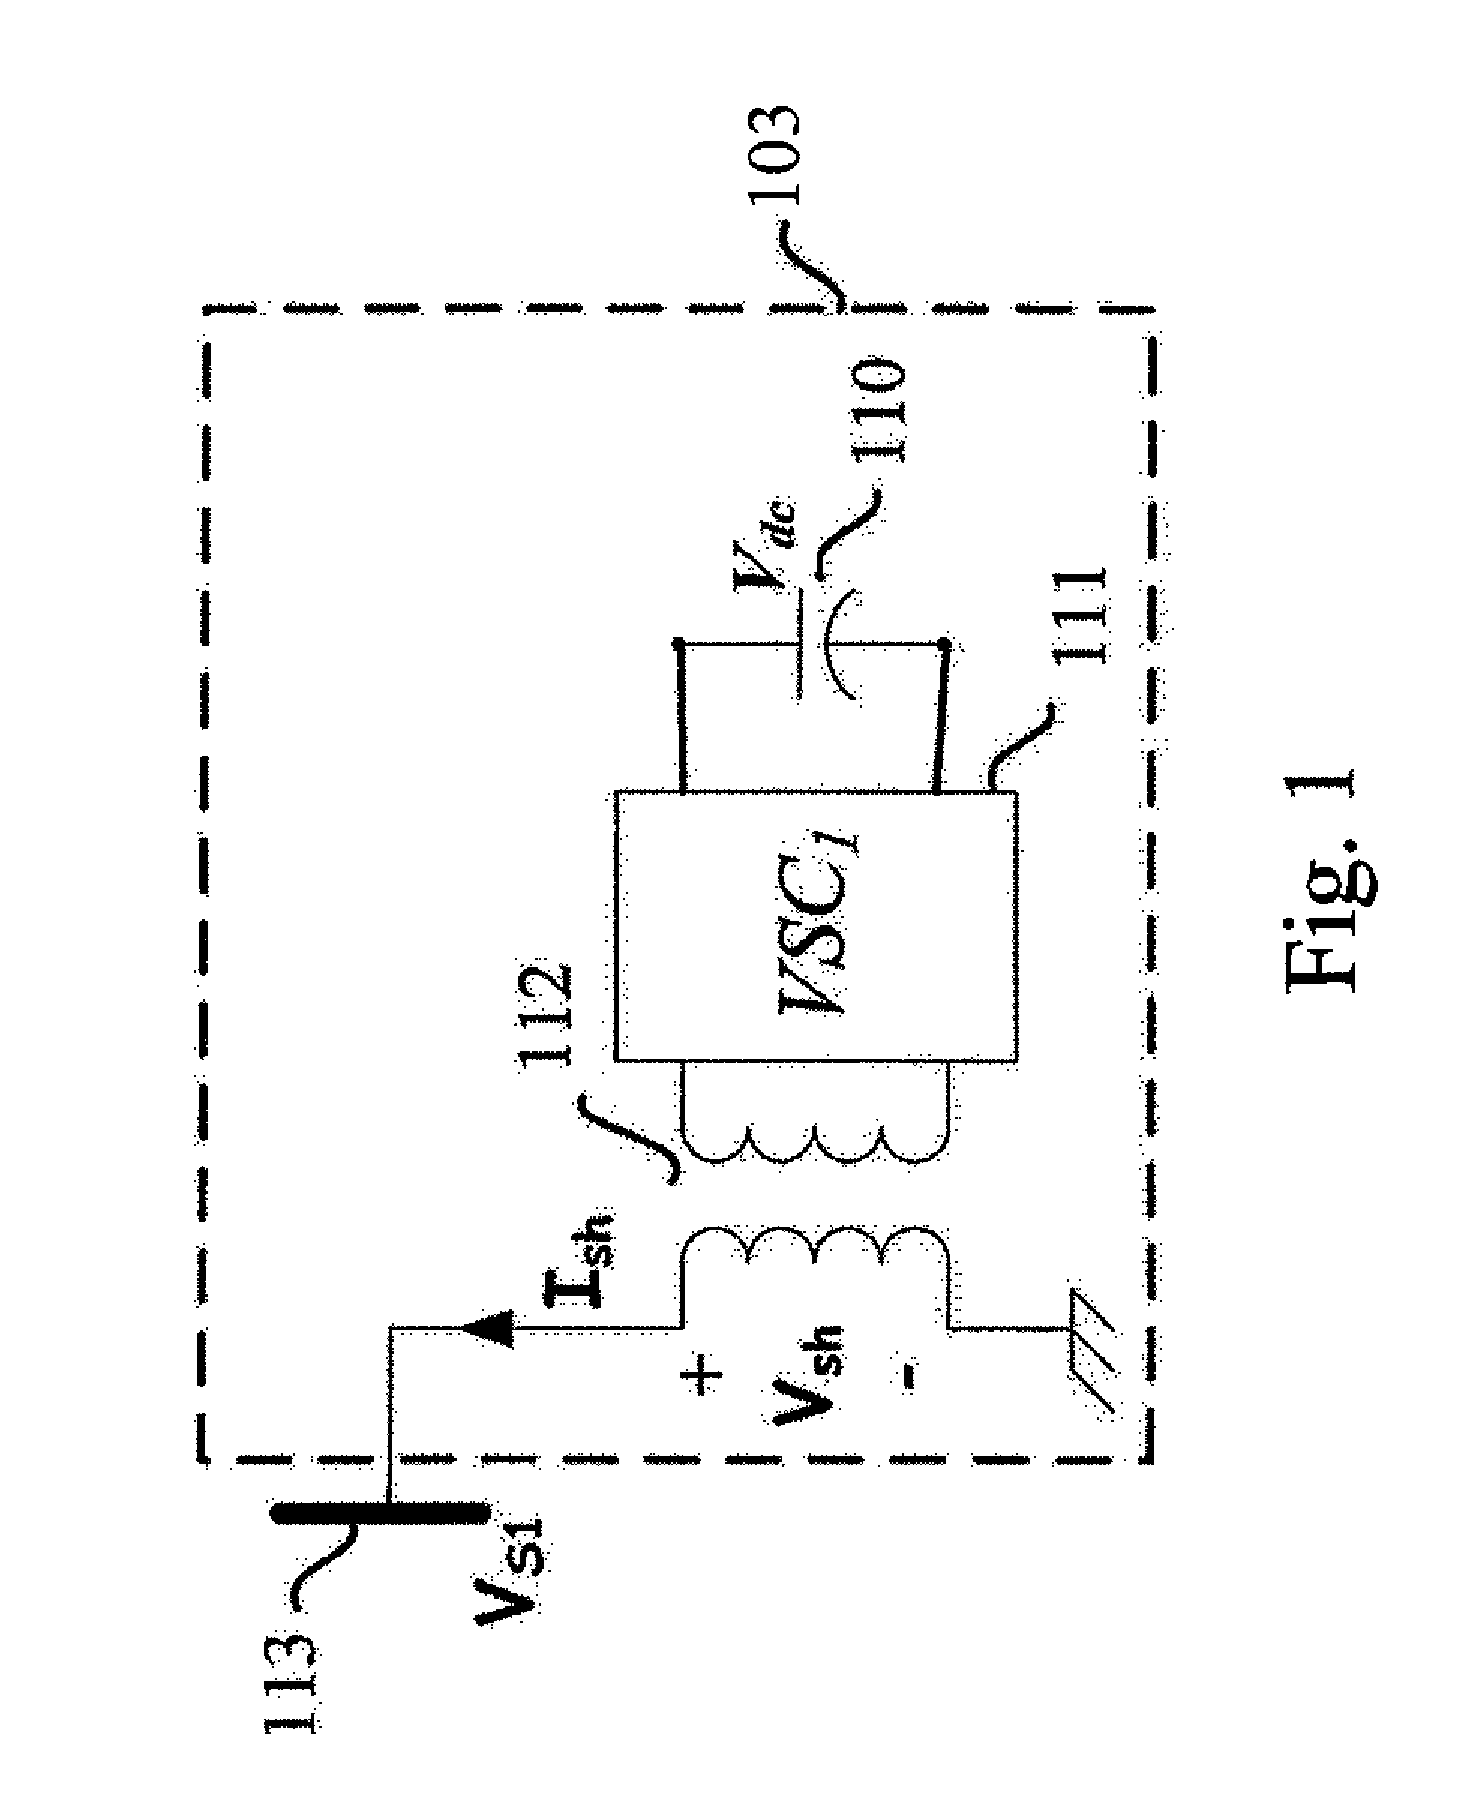 Method of calculating power flow solution of a power grid that includes generalized power flow controllers